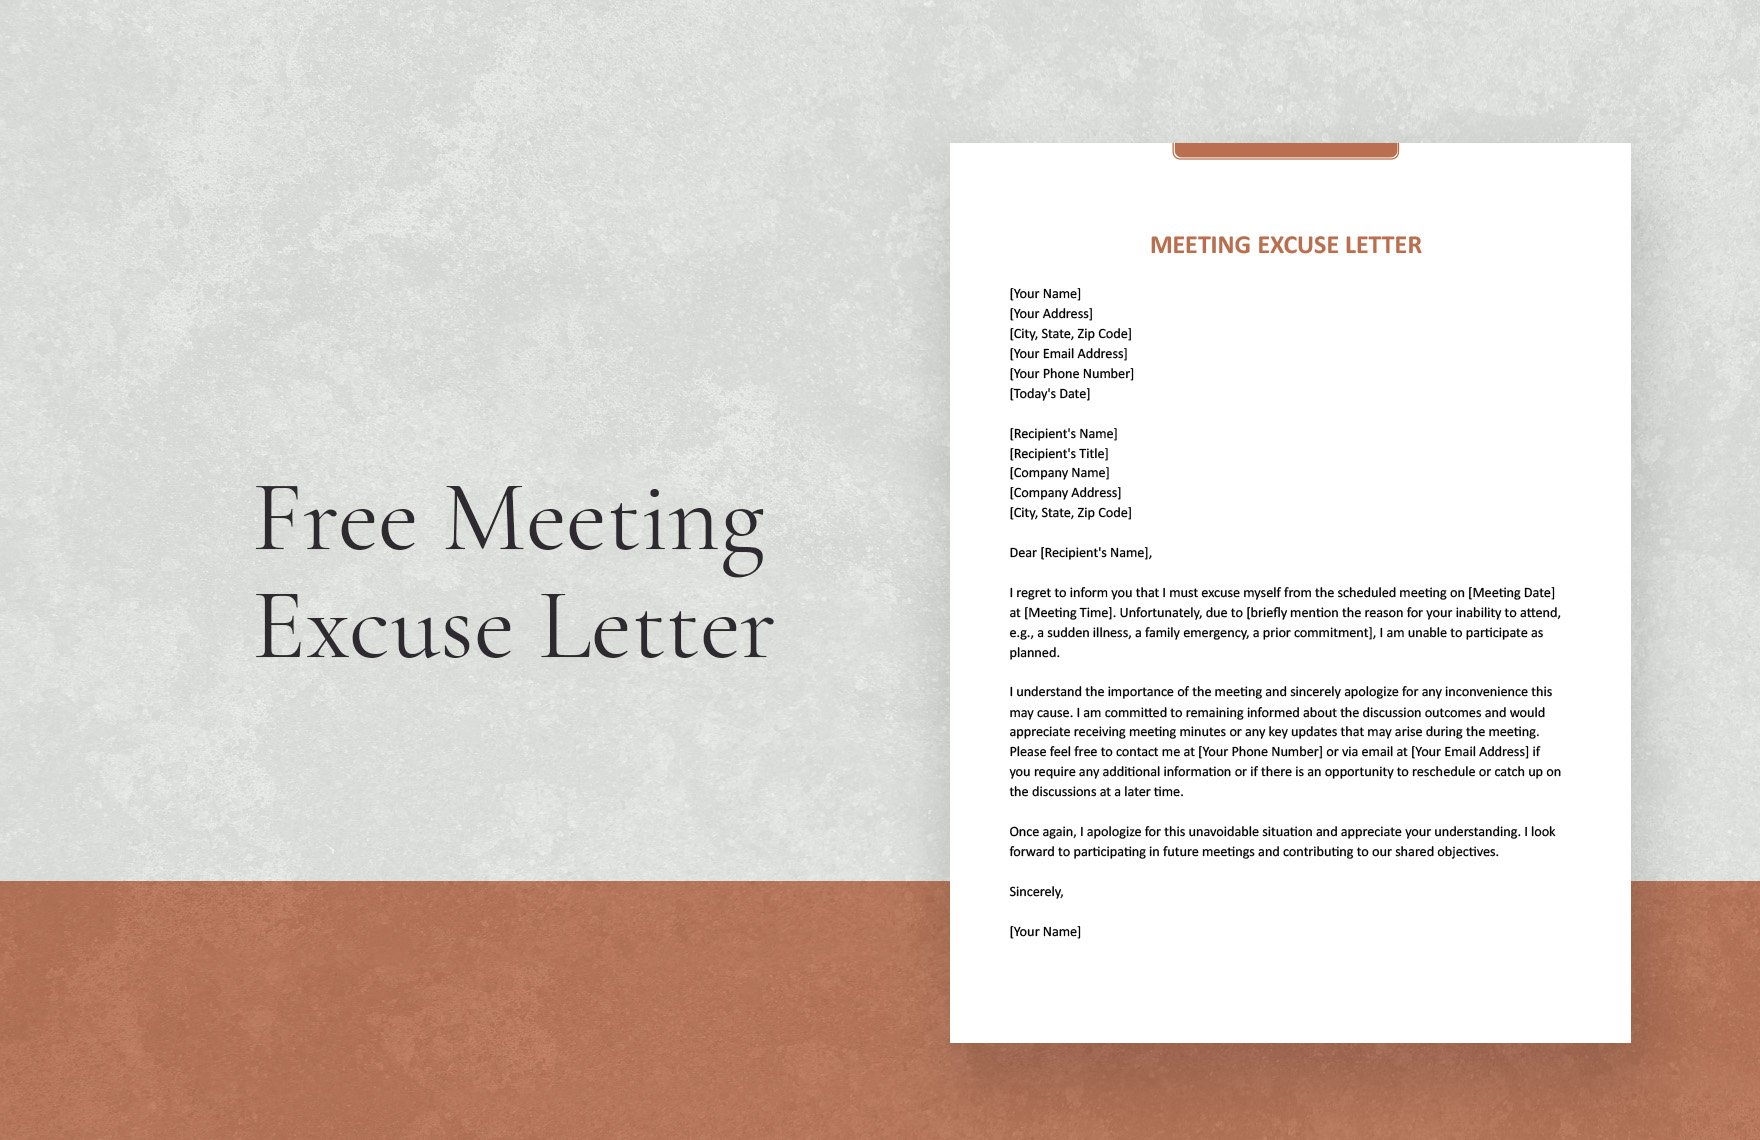 Free Meeting Excuse Letter in Word, Google Docs